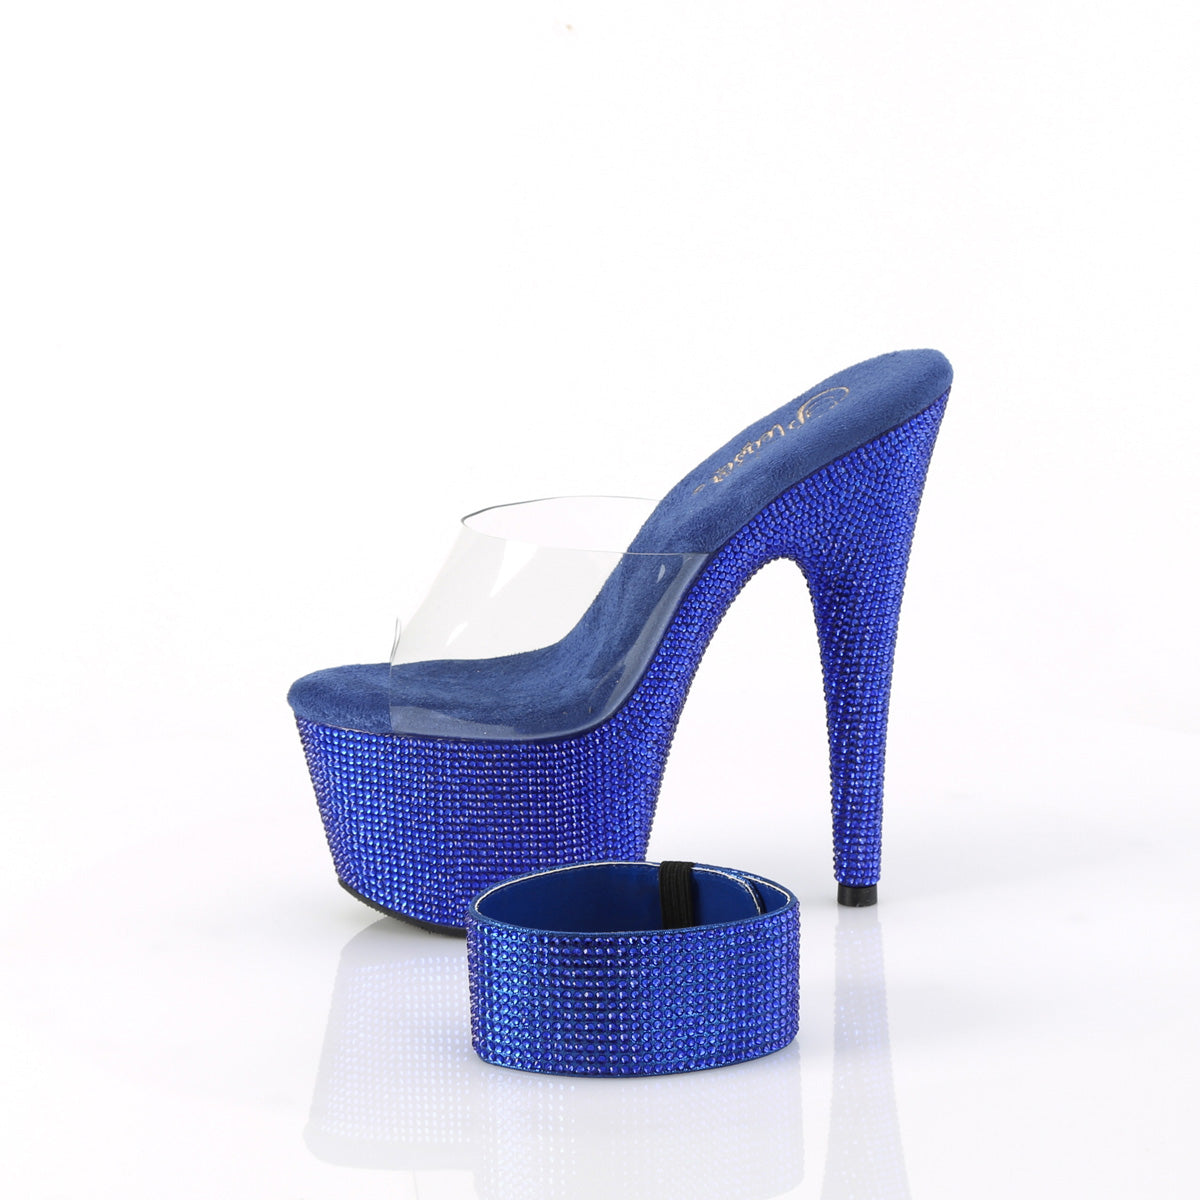 BEJEWELED-712RS Clear & Multi Colour Peep Toe High Heel Blue Multi view 4